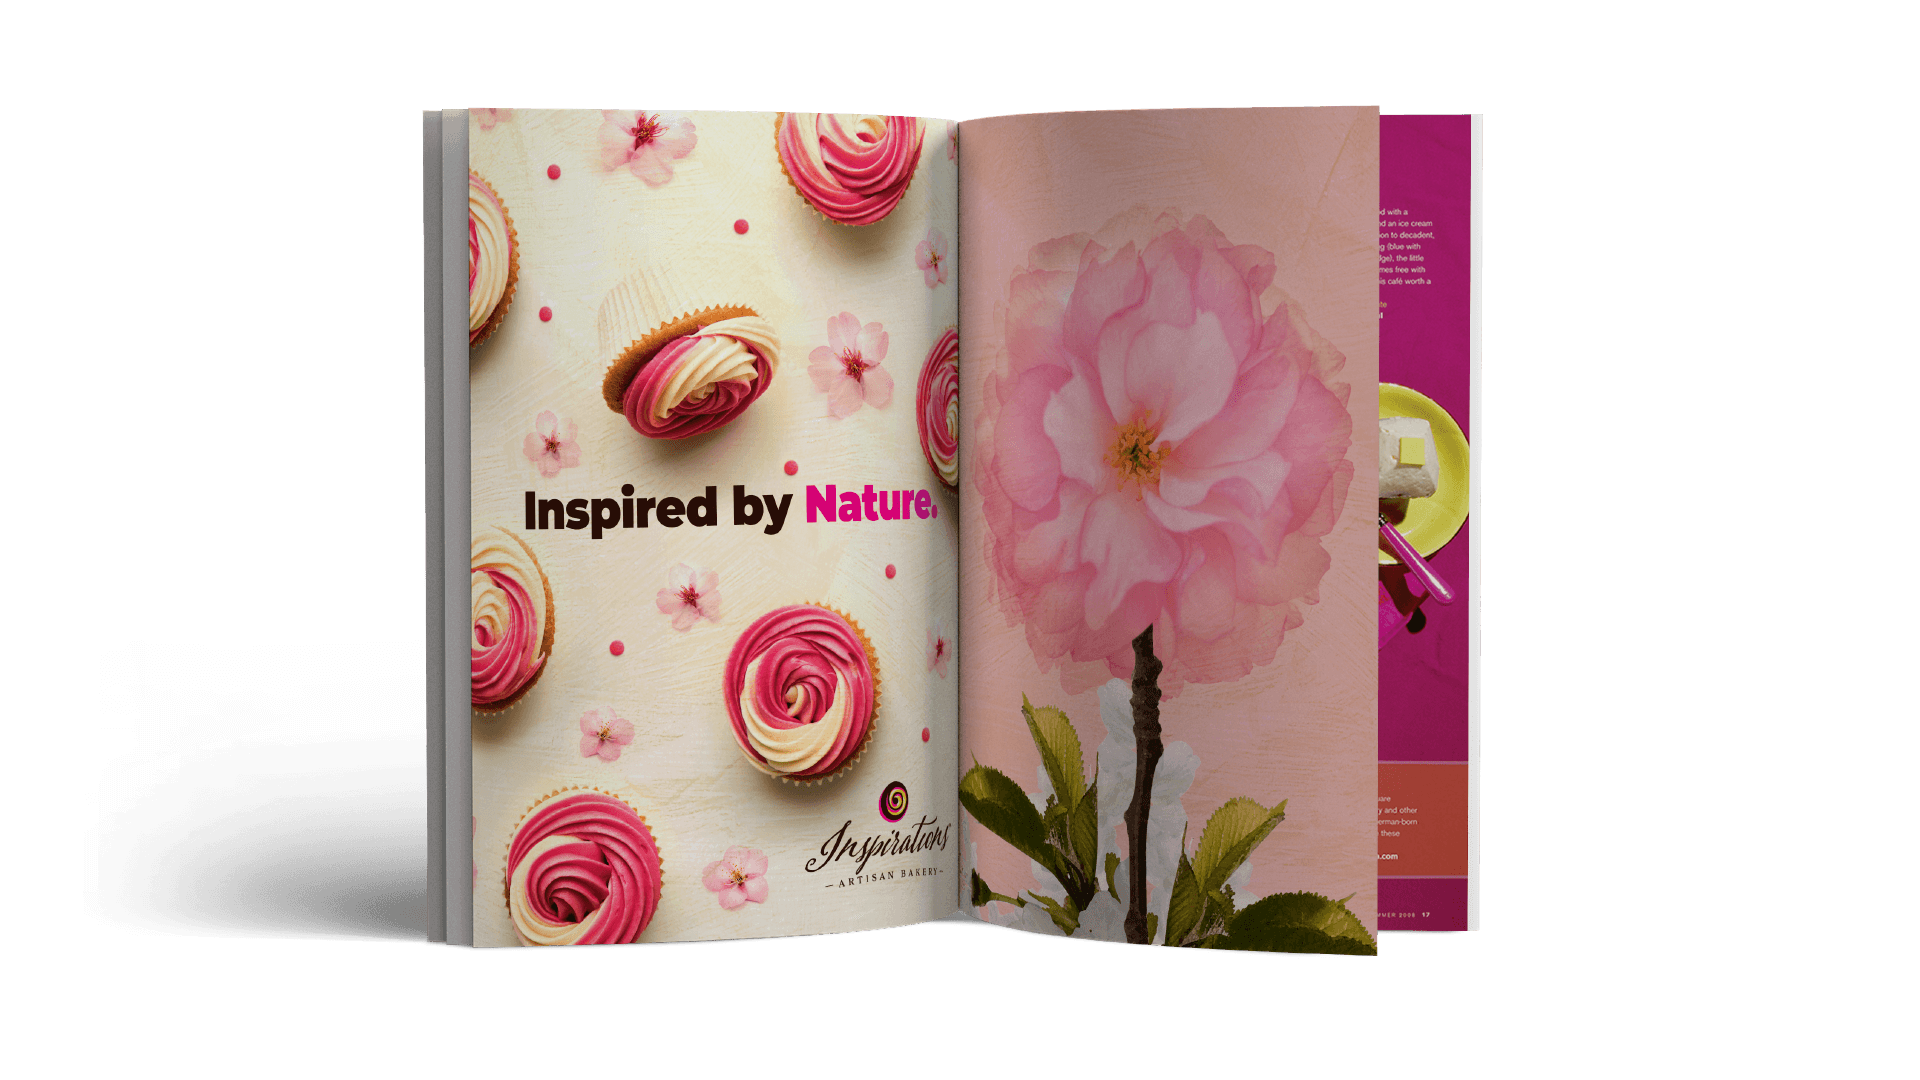 Inspirations Artisan Bakery Inspired by Nature Magazine Ad